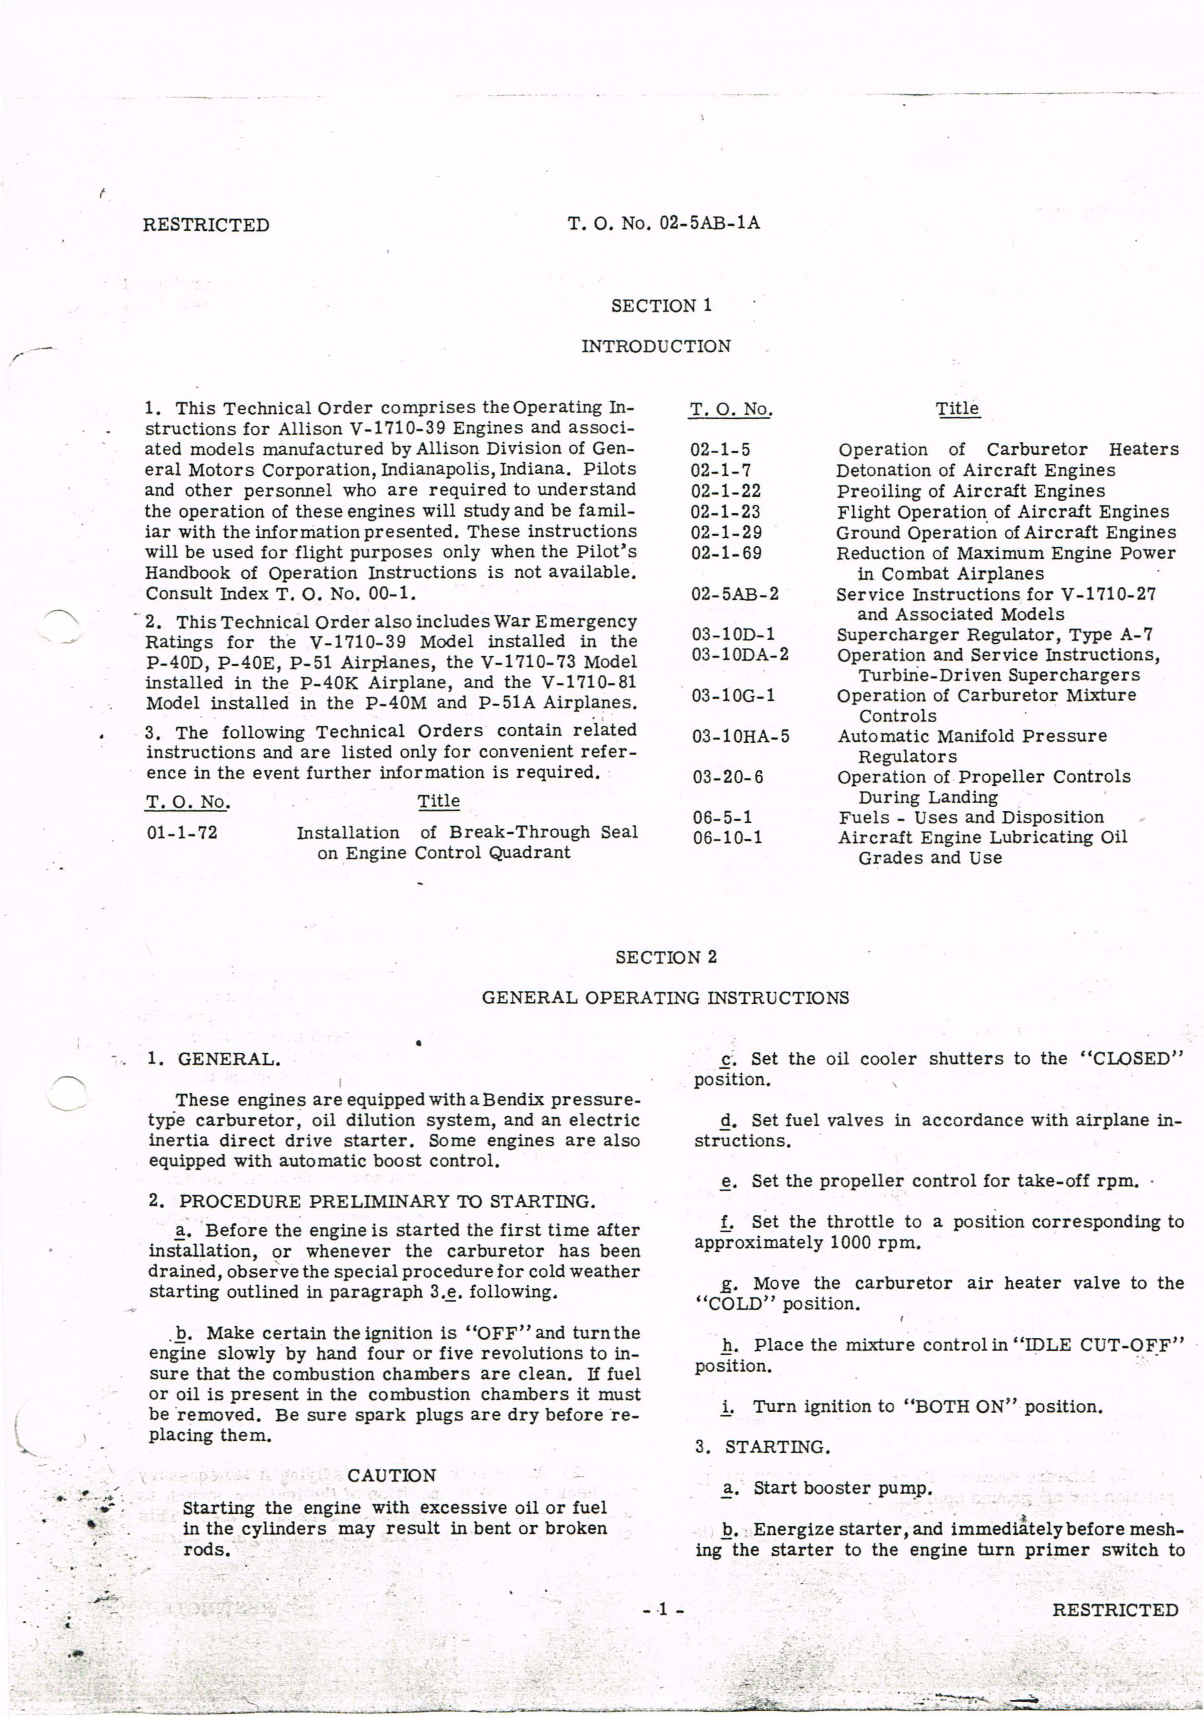 Sample page 5 from AirCorps Library document: Operating Instructions for V-1710-39, V-1710-73, and V-1710-81 Engines